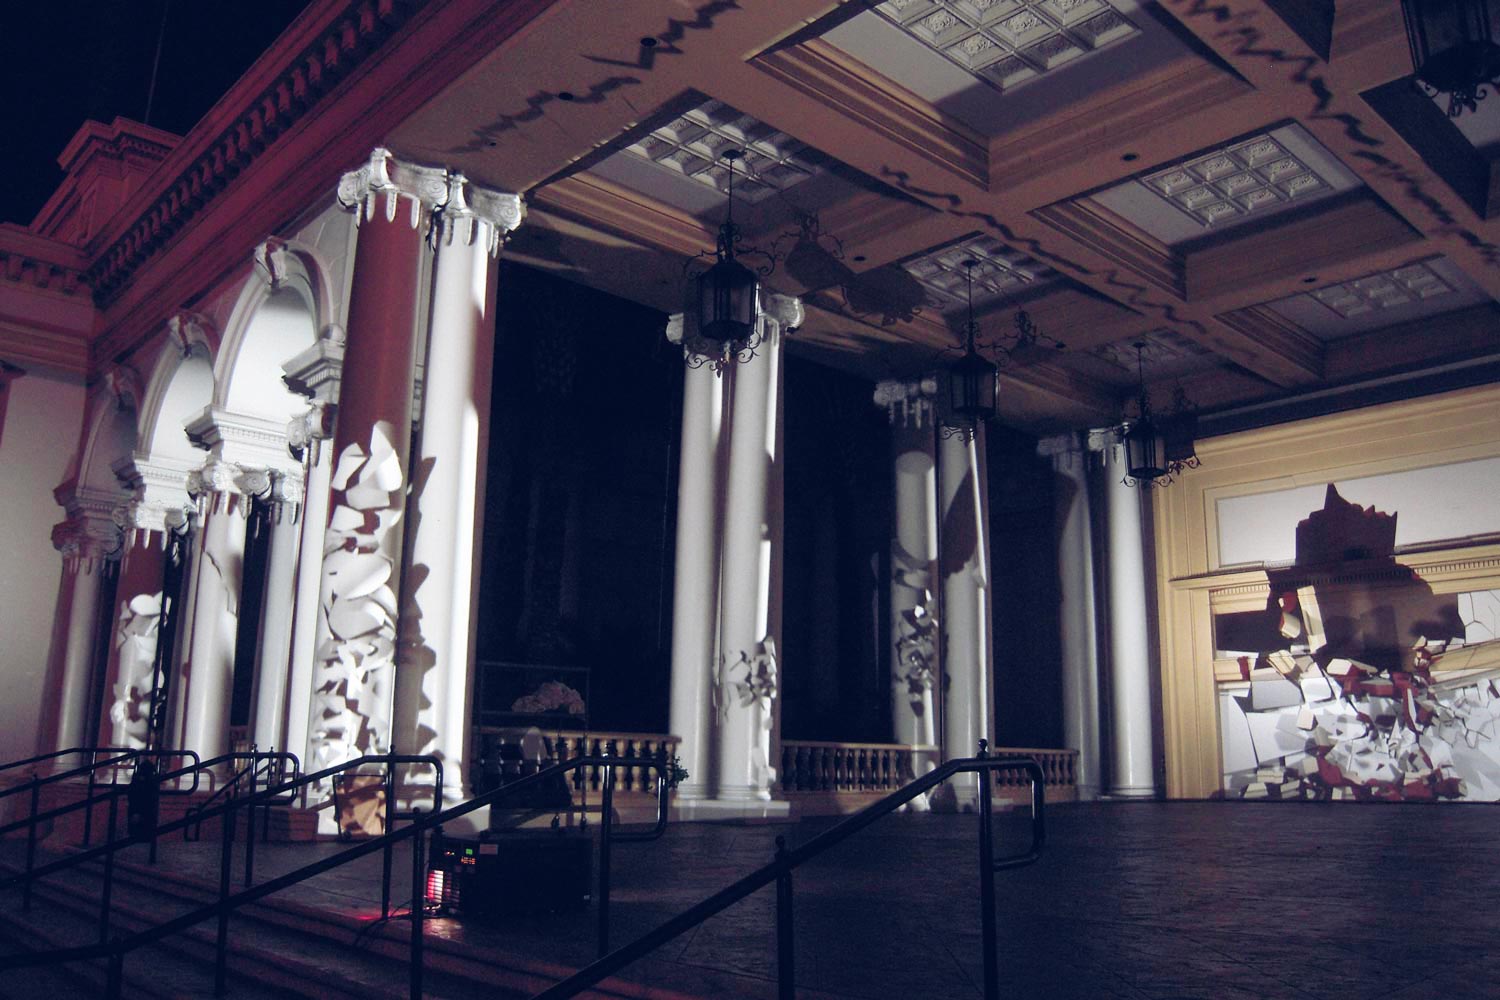 Theatre set with tall white Columns